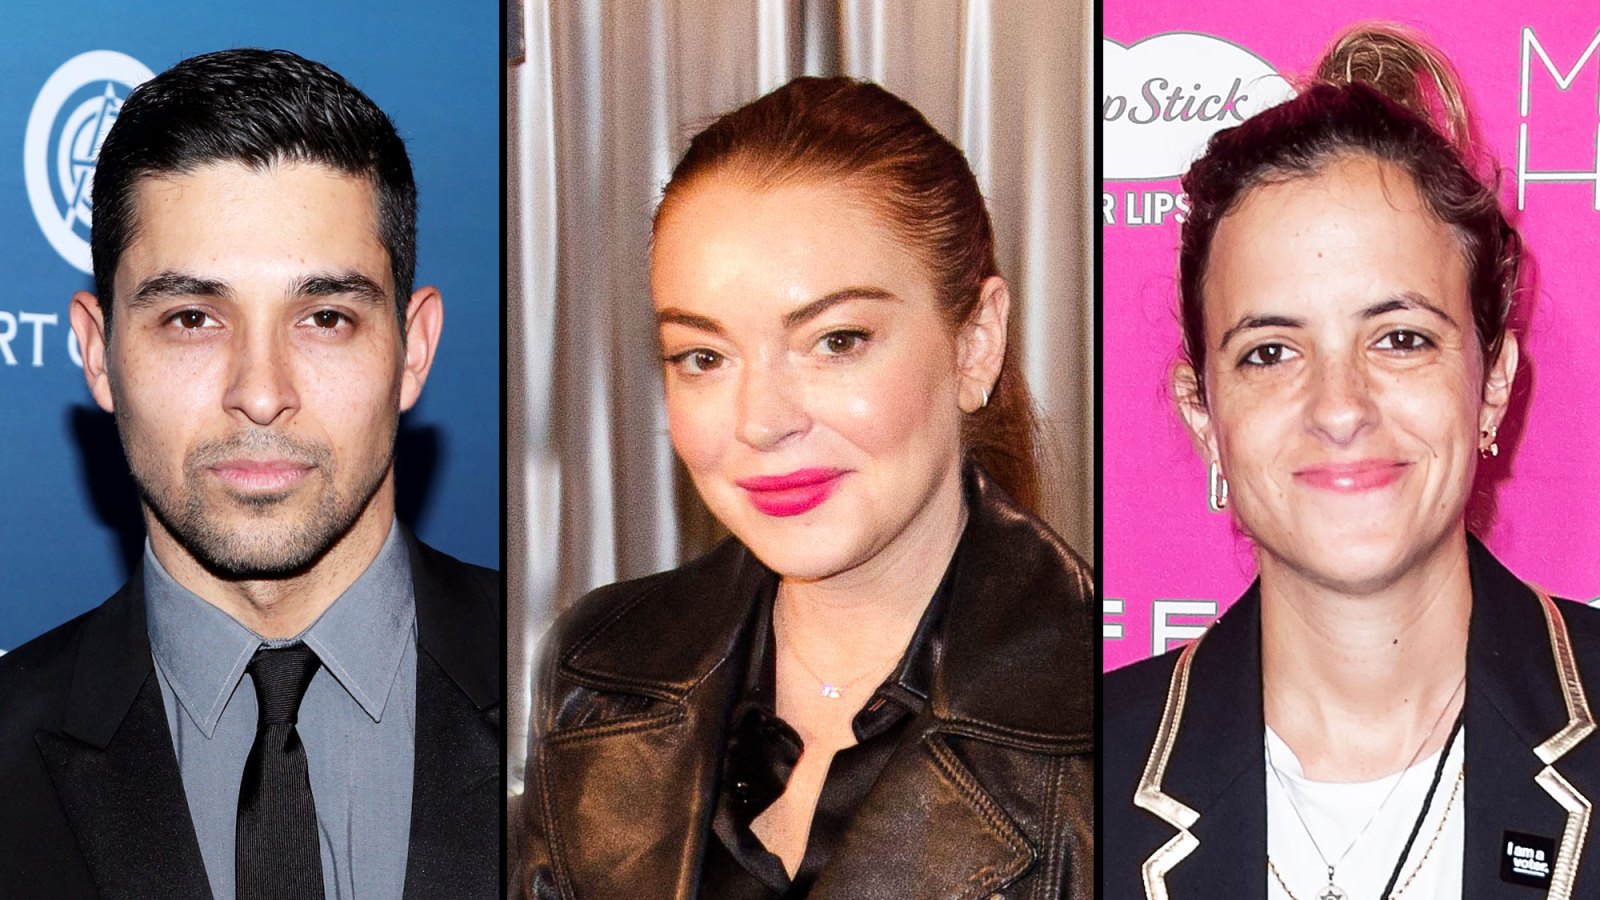 Lindsay Lohan Opens Up About Exes Wilmer Valderrama, Samantha Ronson